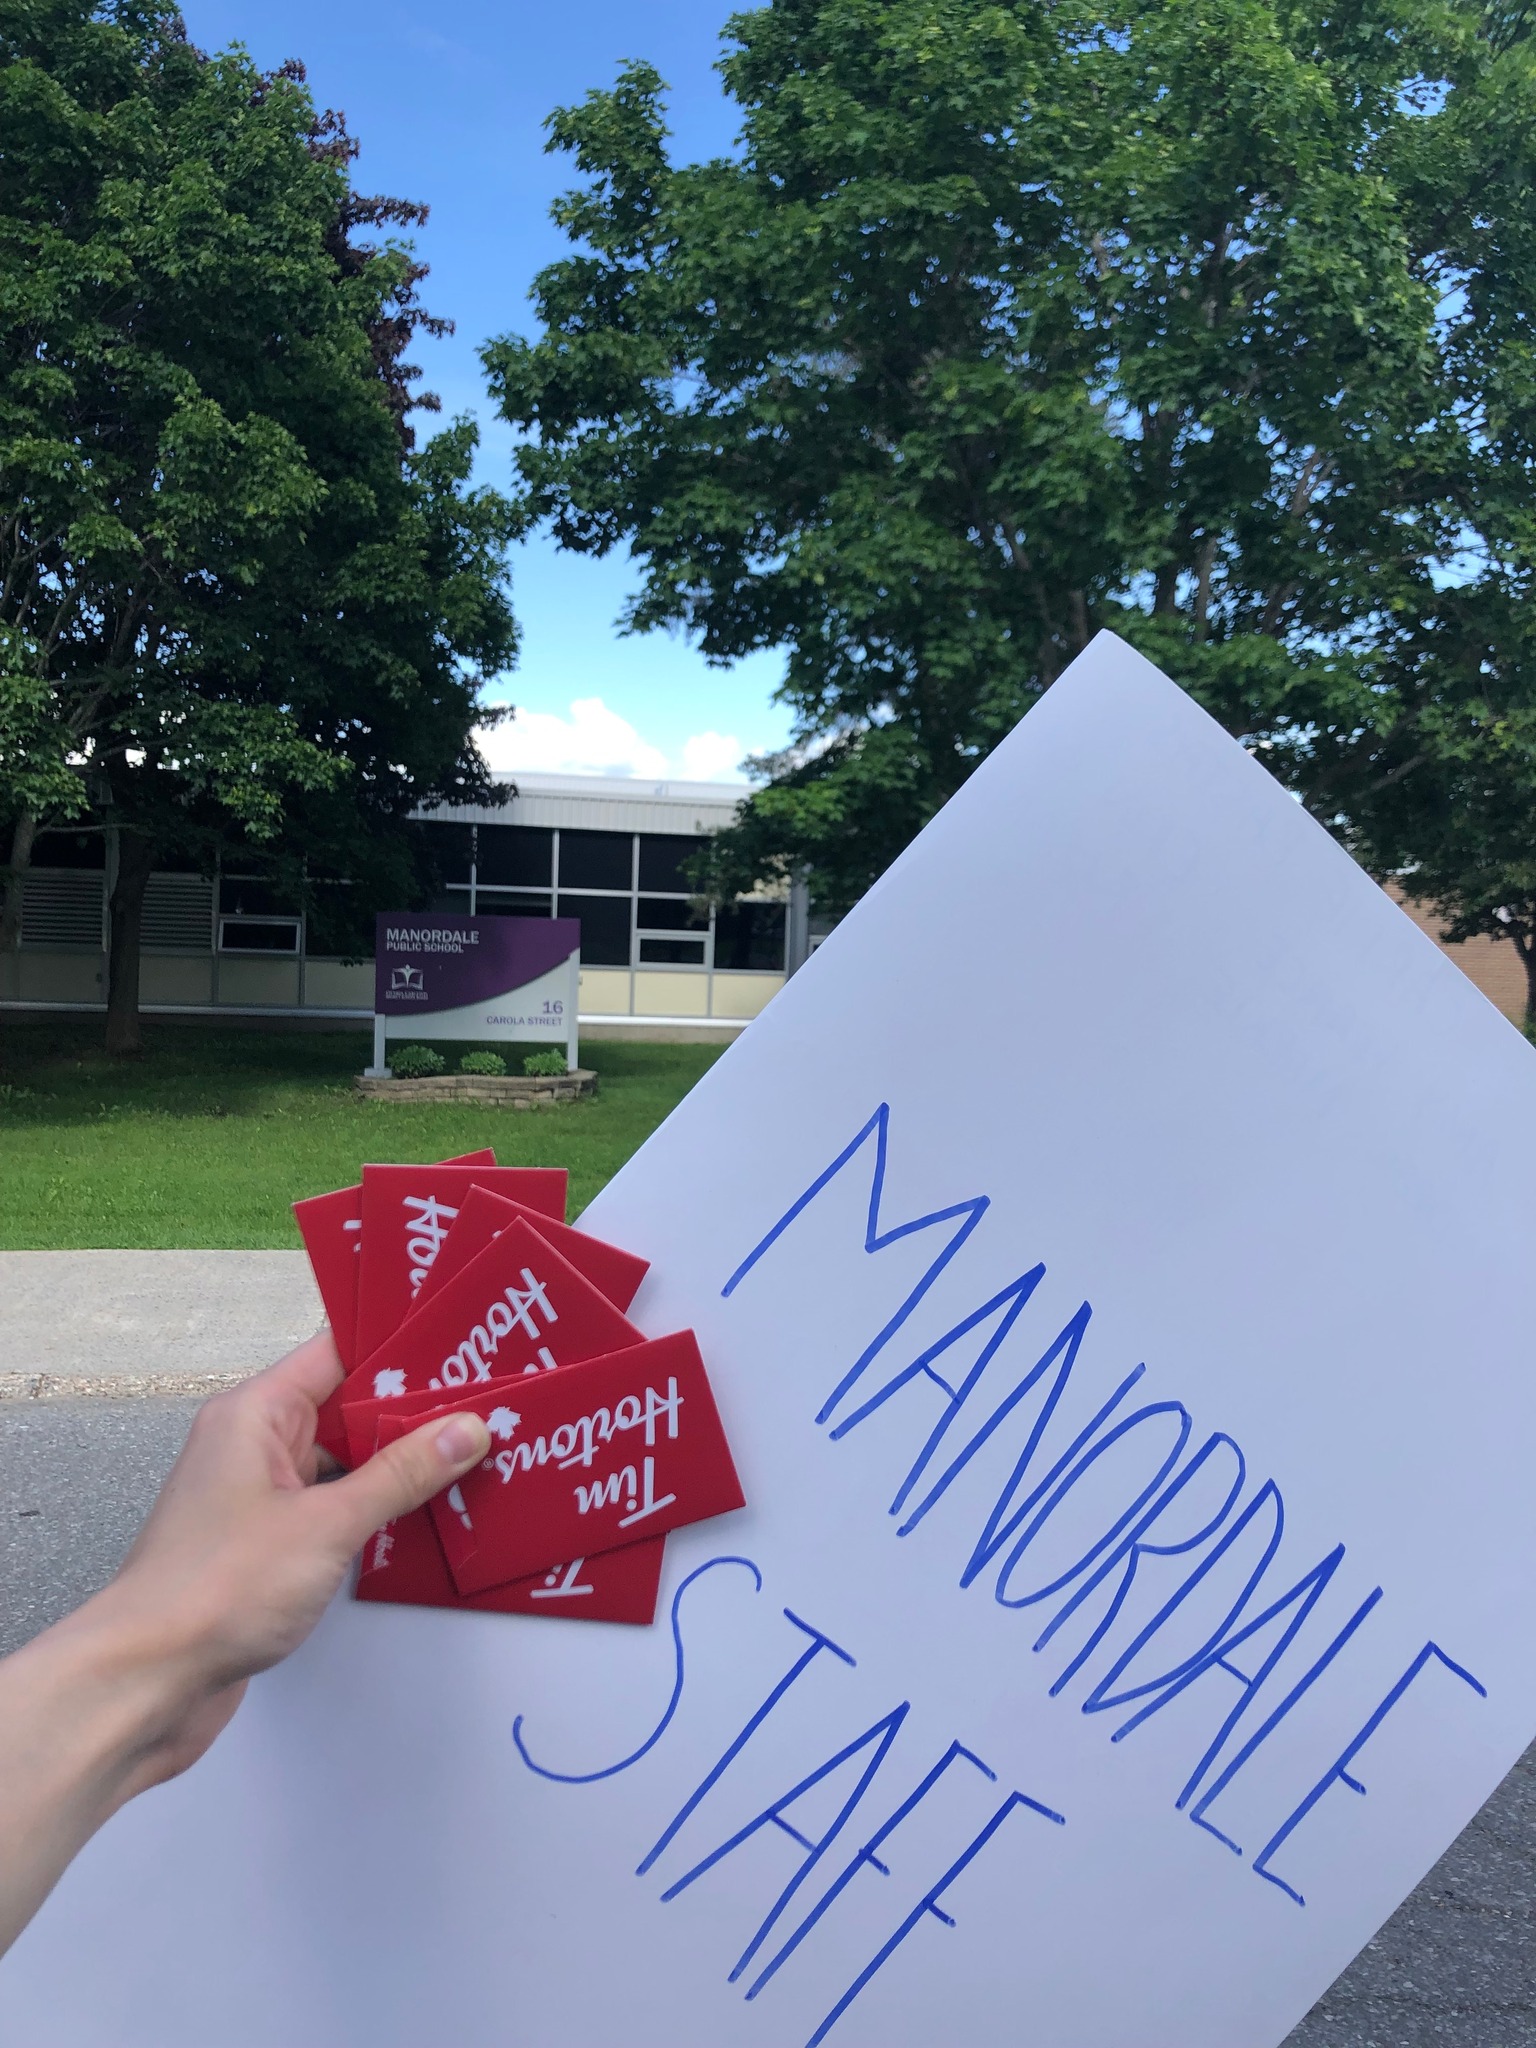 A person holding a sign that reads "Manordale Staff" and Tim Horton's gift cards.